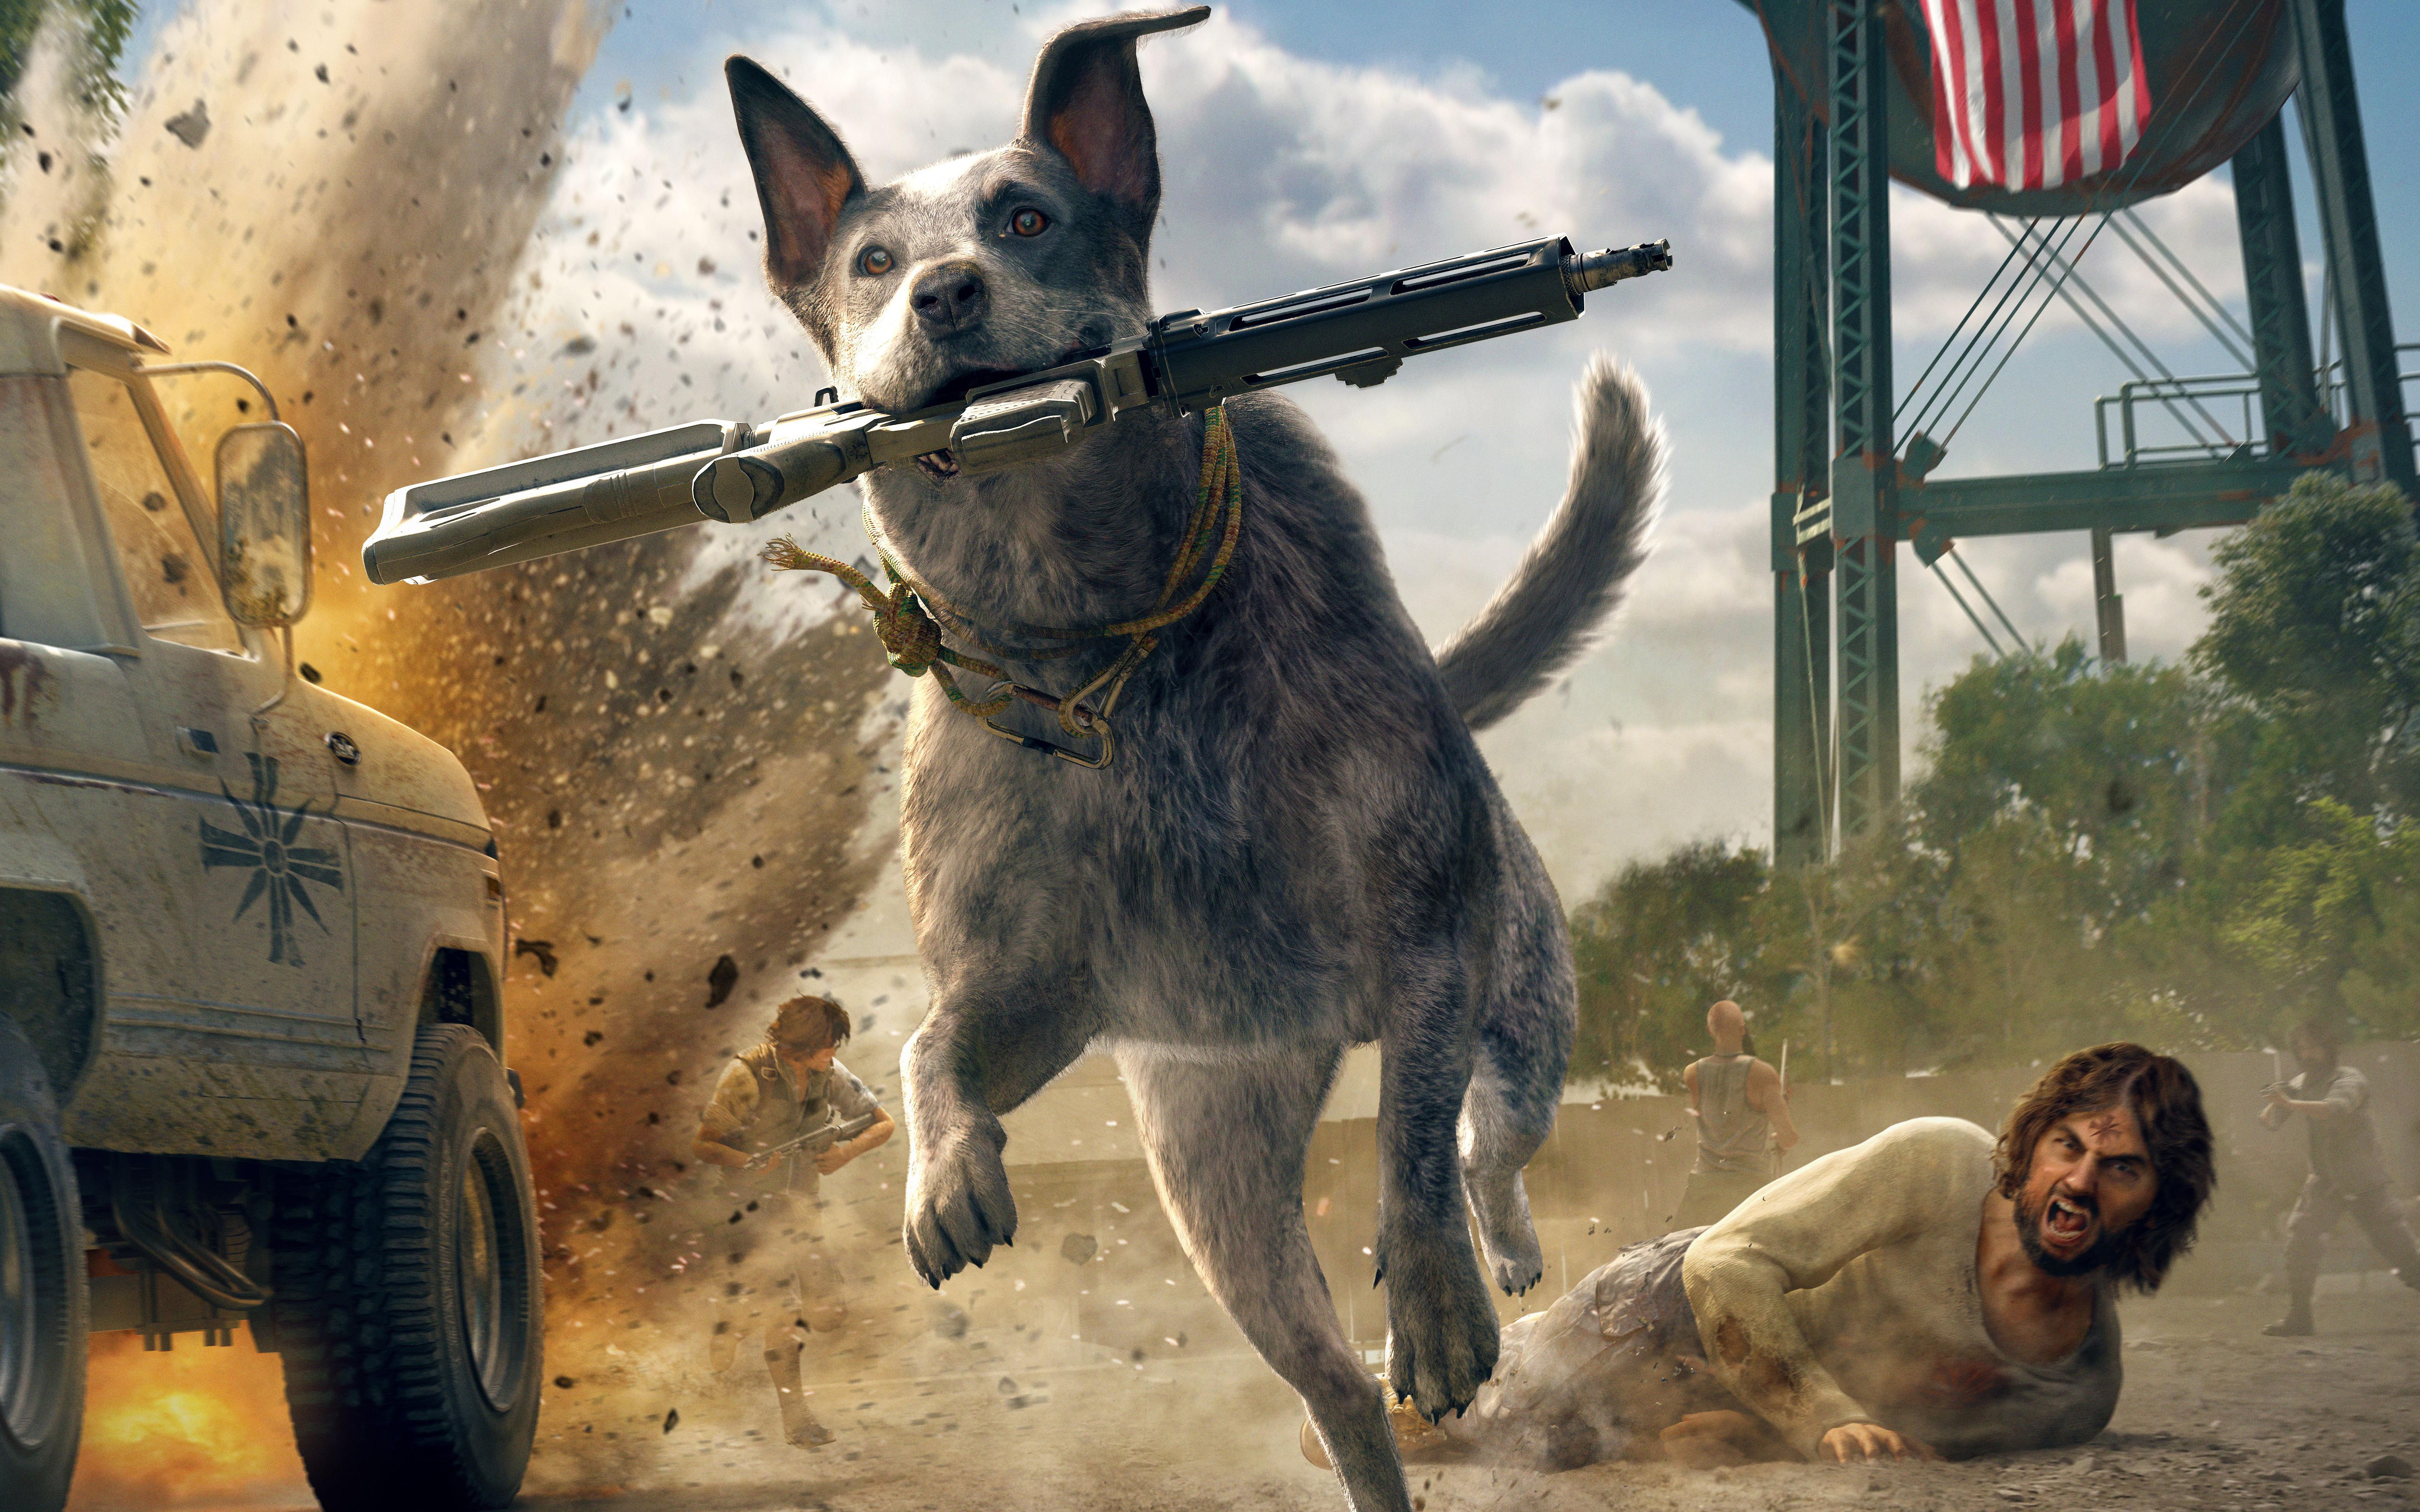 HD wallpaper, Video Games, Video Game Characters, Assault Rifle, Dog, Running, Far Cry 5, Far Cry, Boomer, Fictional Character